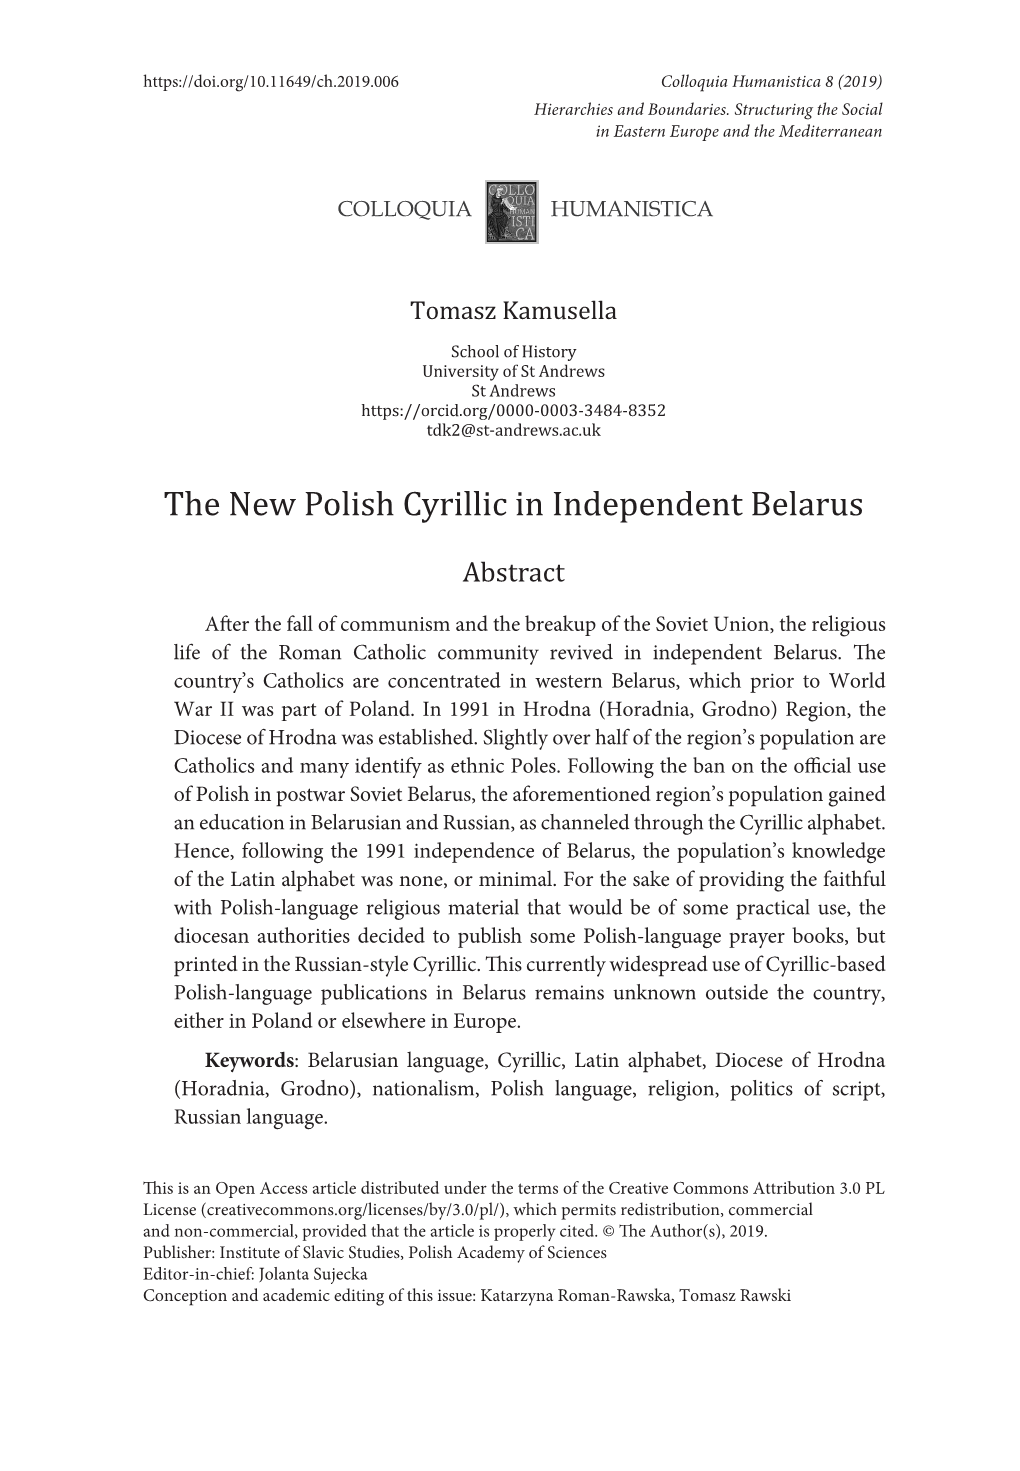 The New Polish Cyrillic in Independent Belarus